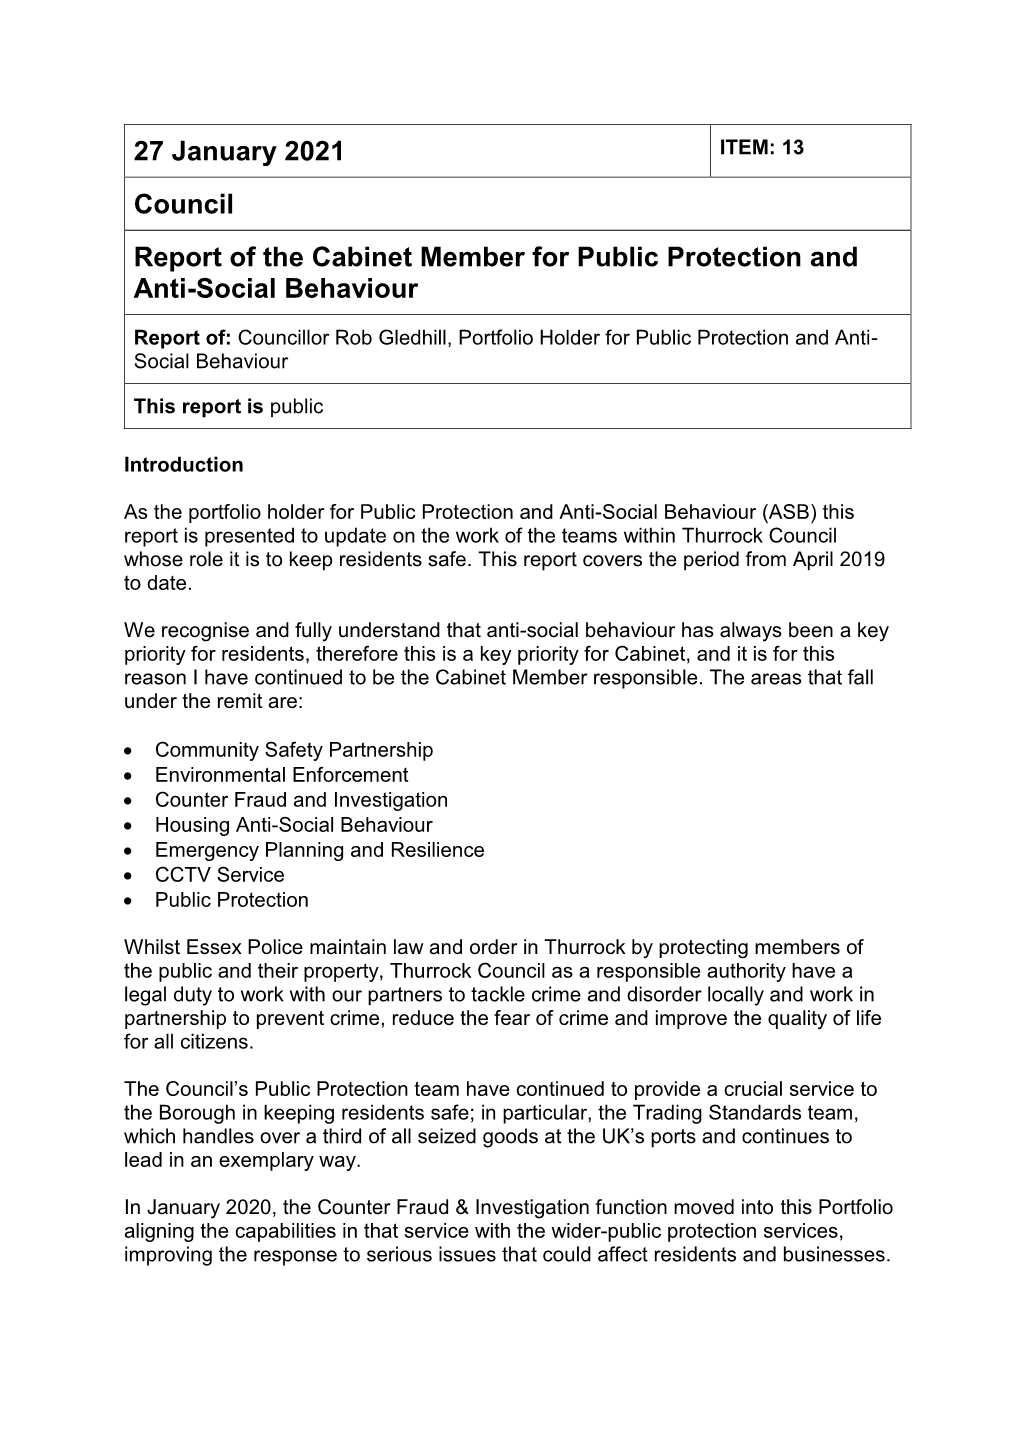 27 January 2021 Council Report of the Cabinet